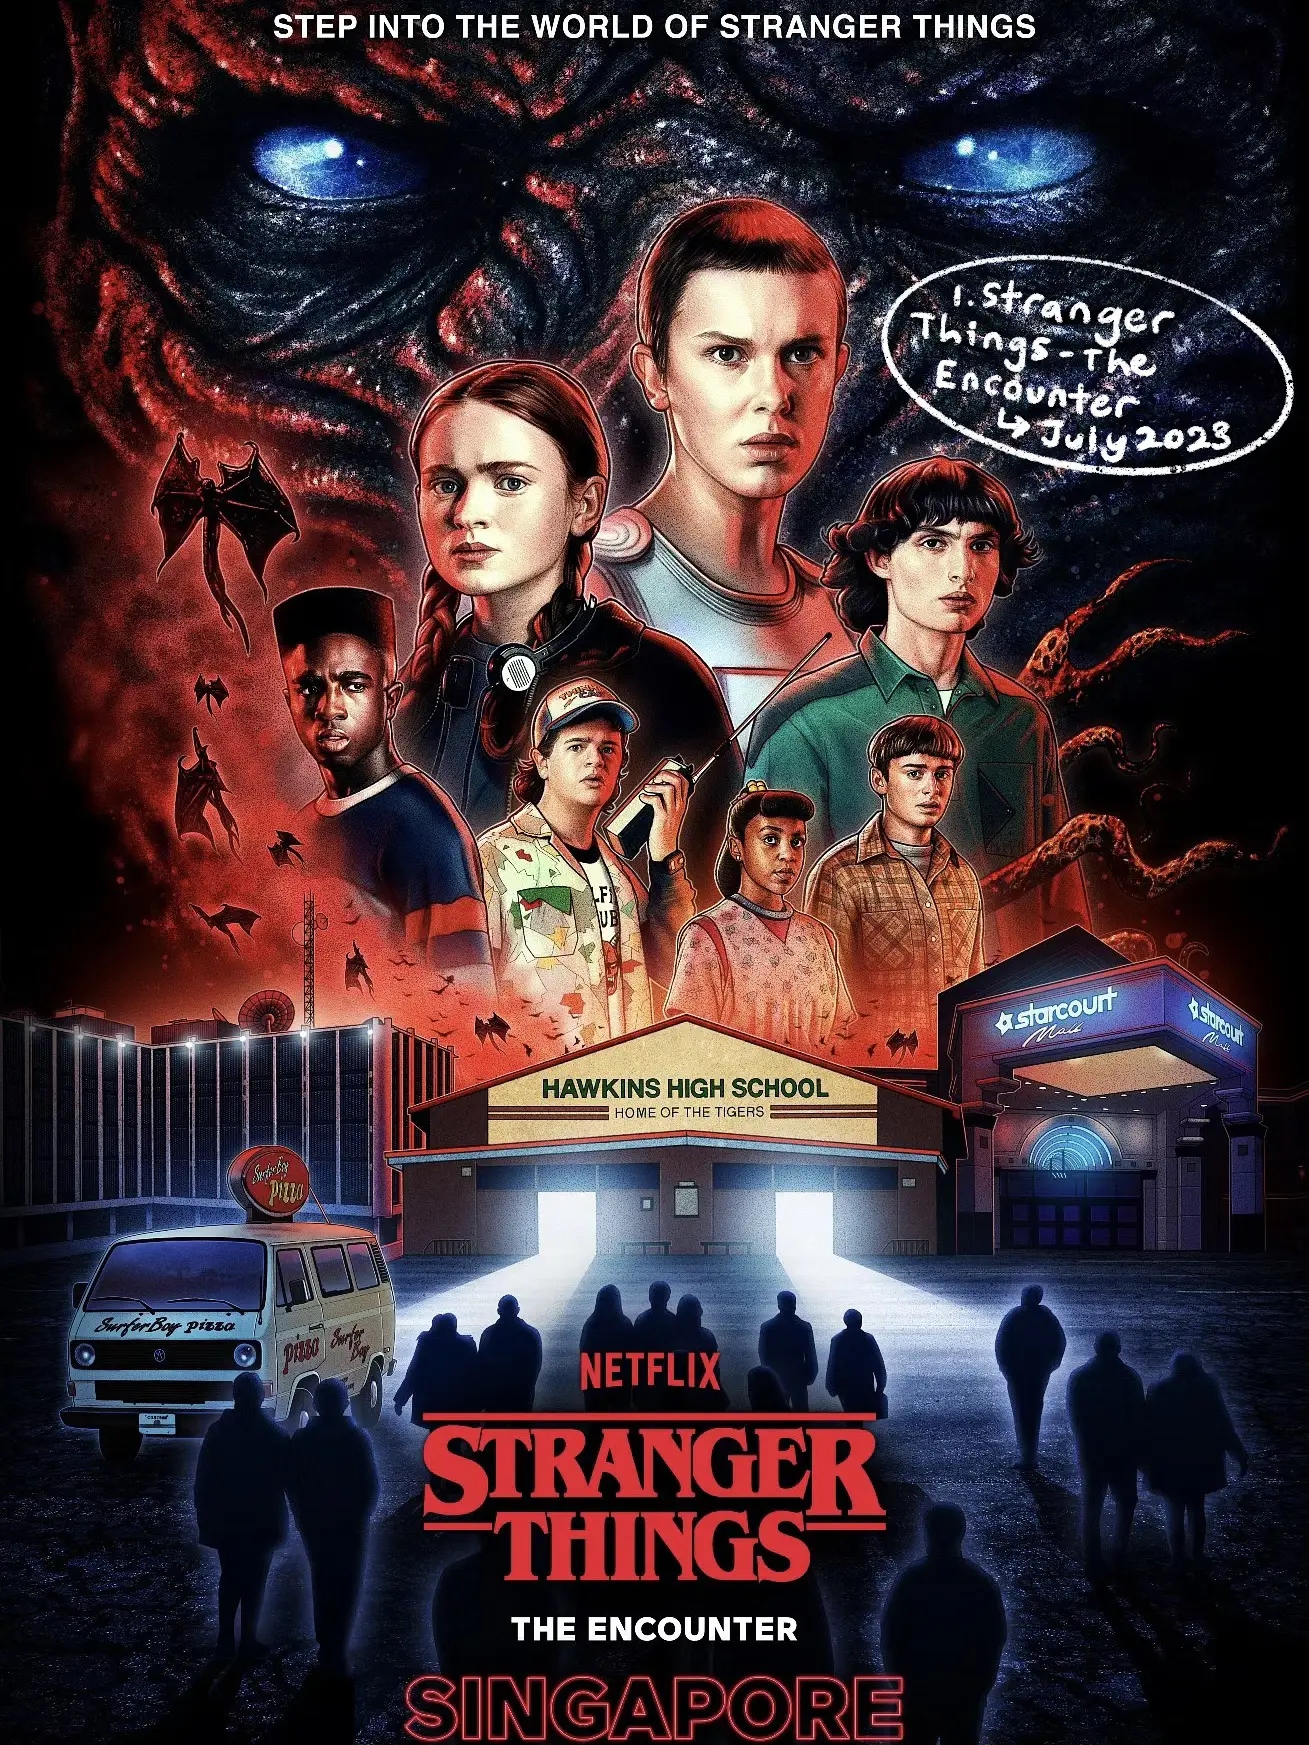 Stranger Things - The Encounter in Singapore - Klook Singapore